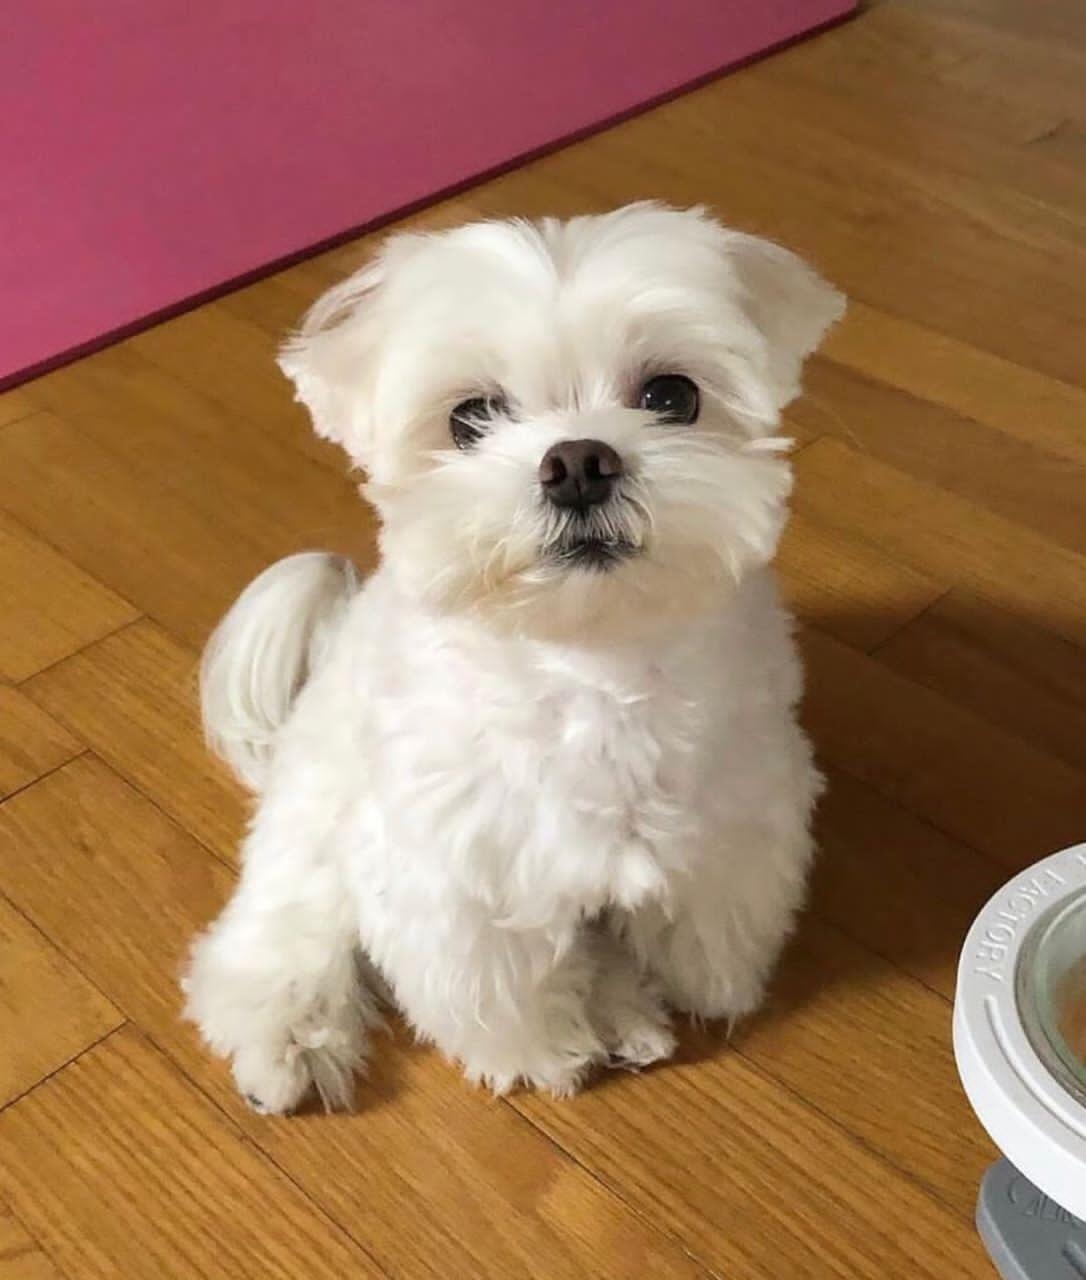 cute maltese puppies for sale/adoption